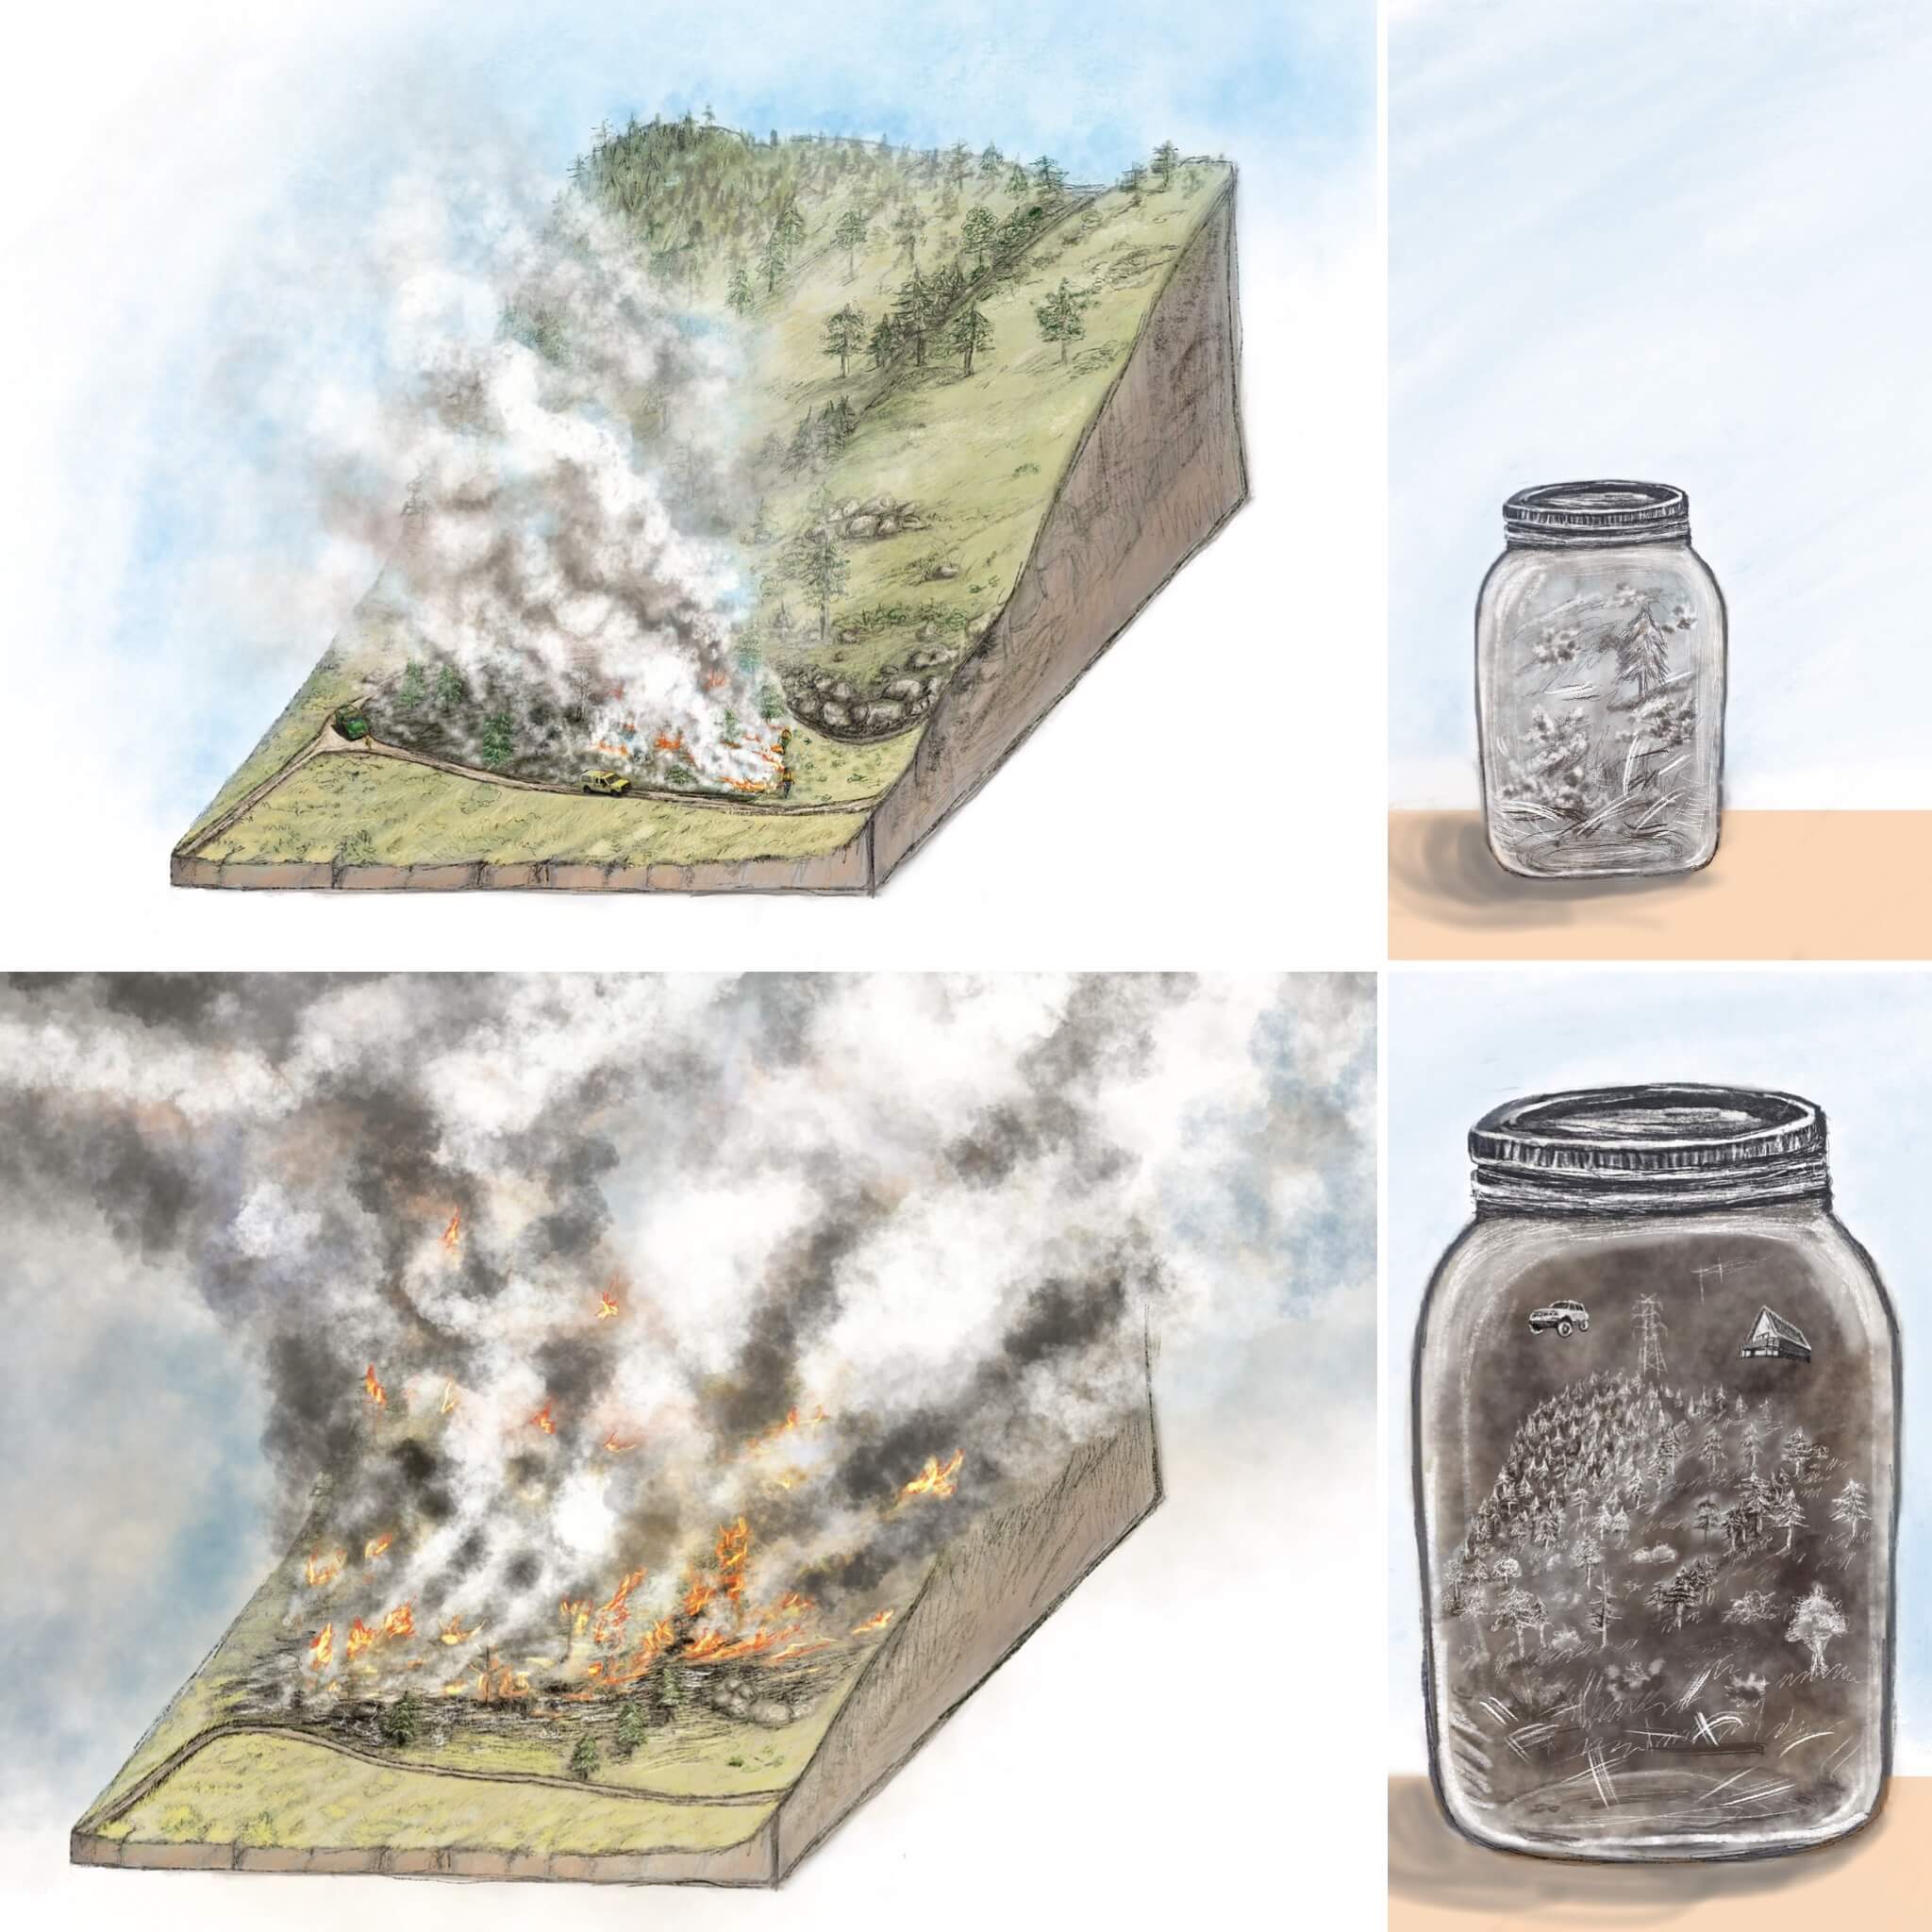 Create simple of elaborate diagrams that can help visualize fire and smoke over time or use creative ideas to represent differences over time, such as smoke jars.